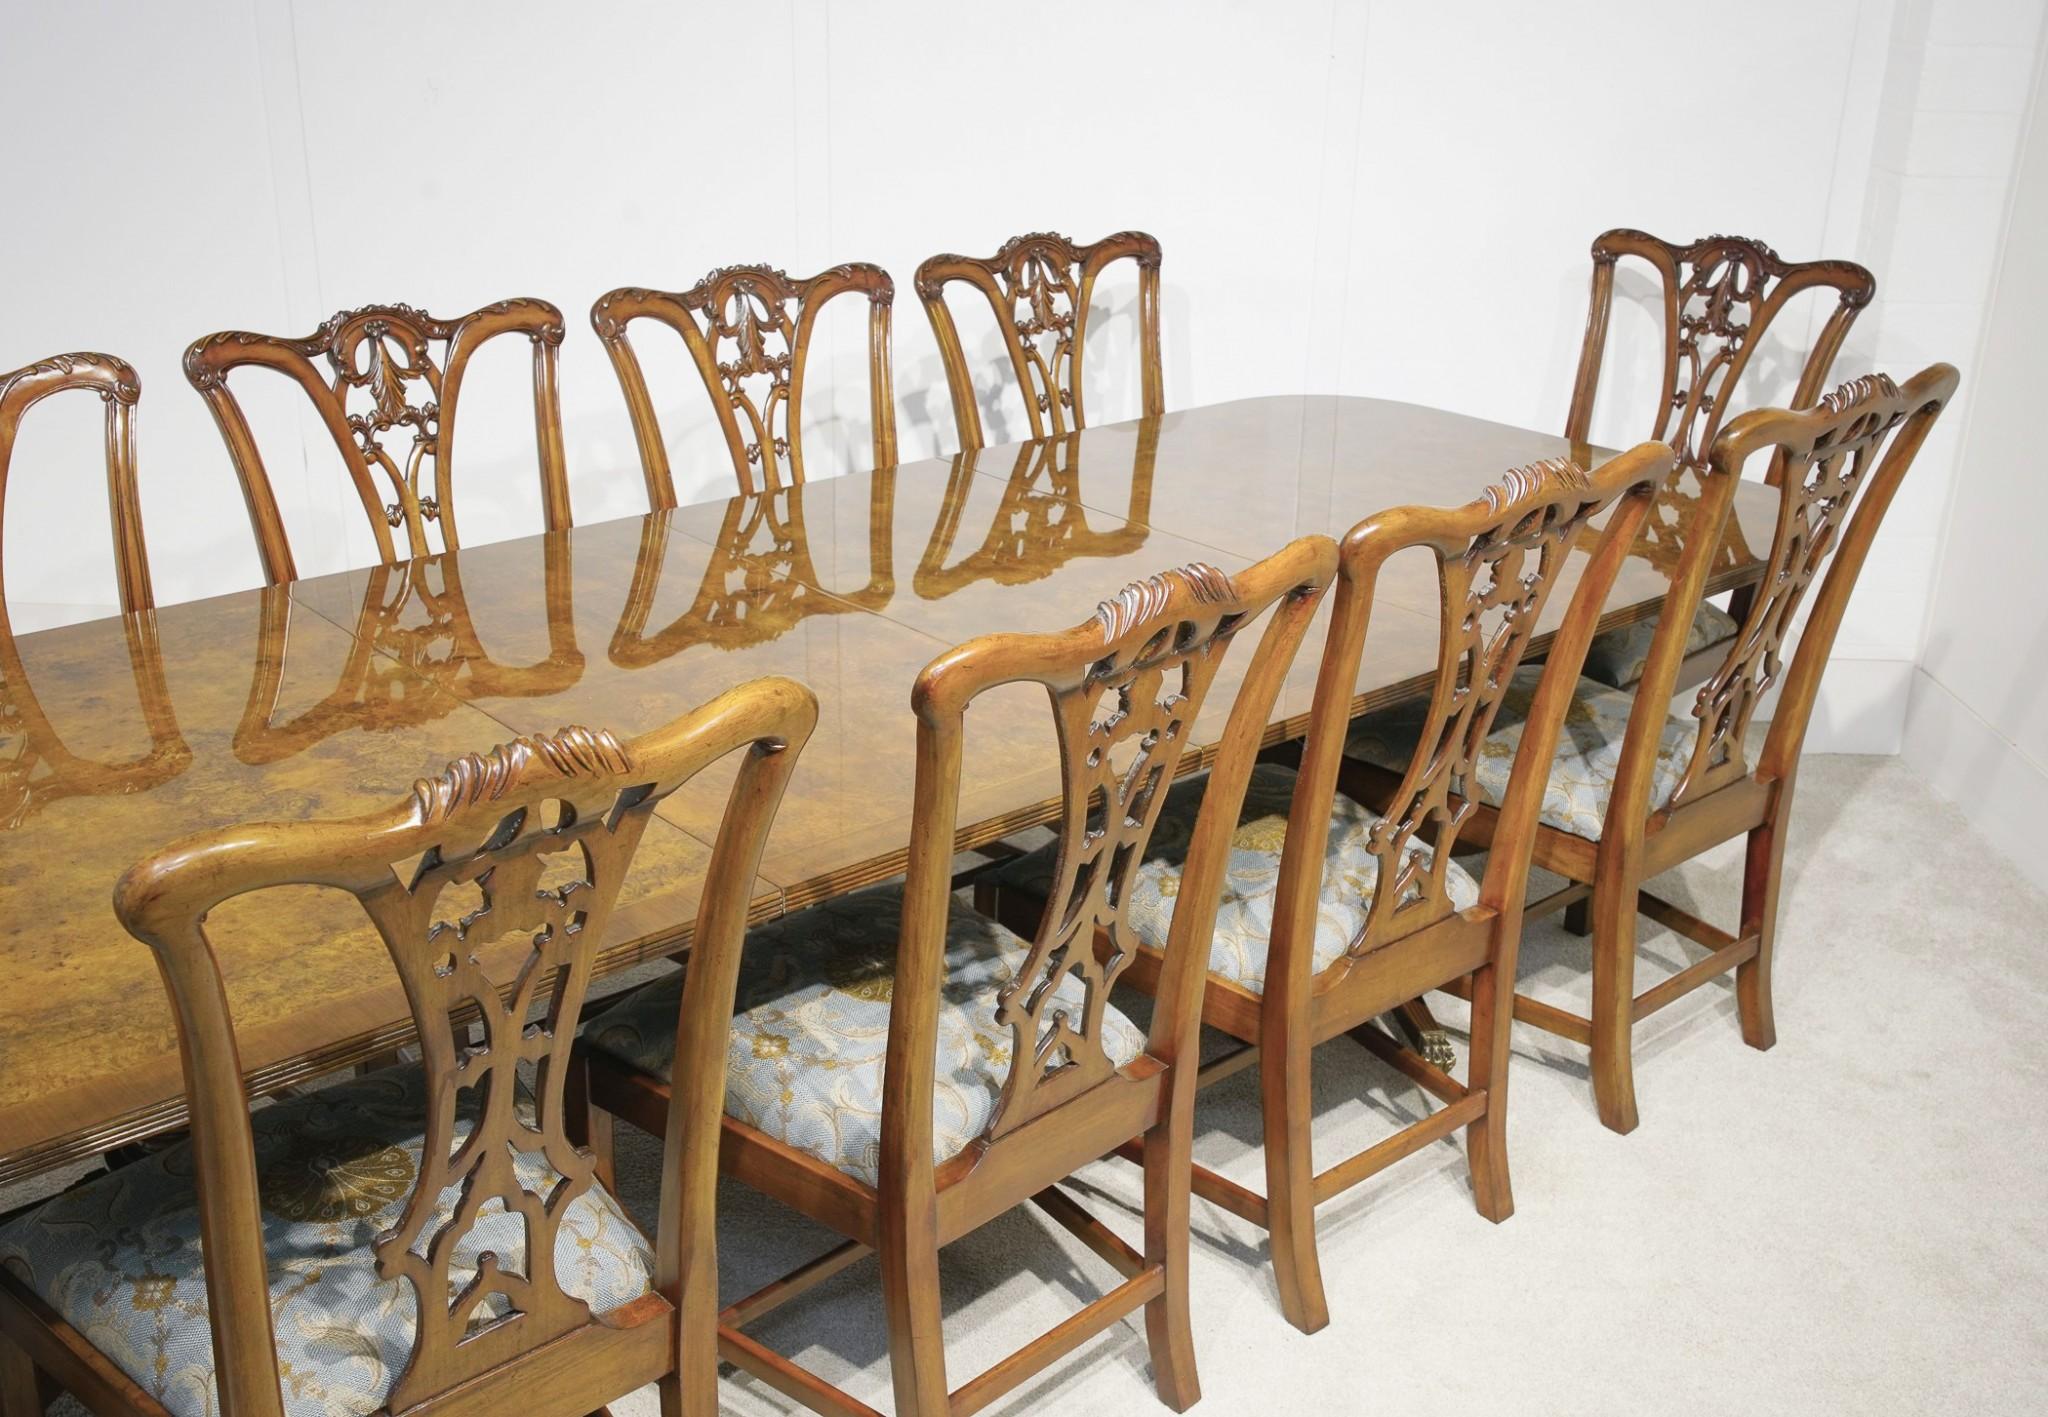 Sumptuous dining set in the form of a Regency revival pedestal table and set of ten matching chairs
The set of ten chairs are in the Chippendale manner - very solid and comfortable to sit in
The finish to the walnut is glorious with a delighful burr